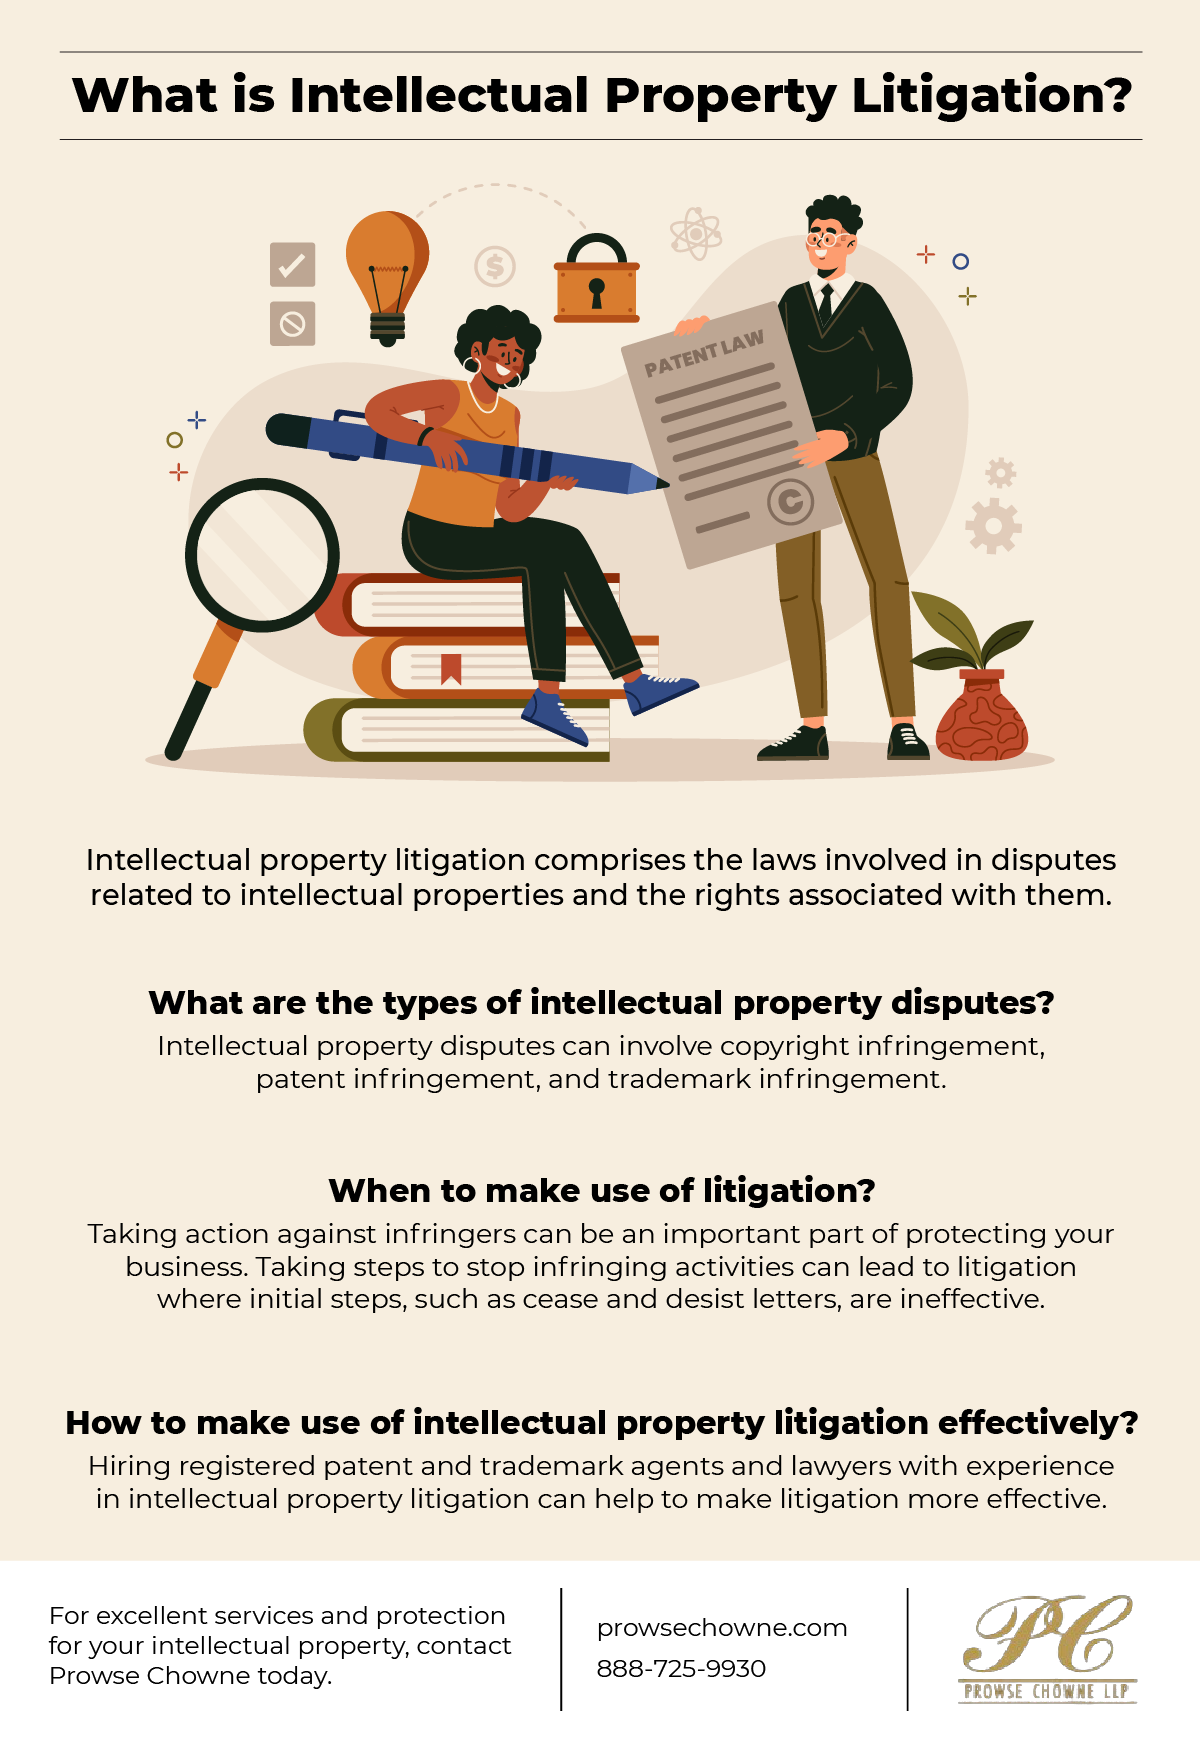 What is Intellectual Property Litigation